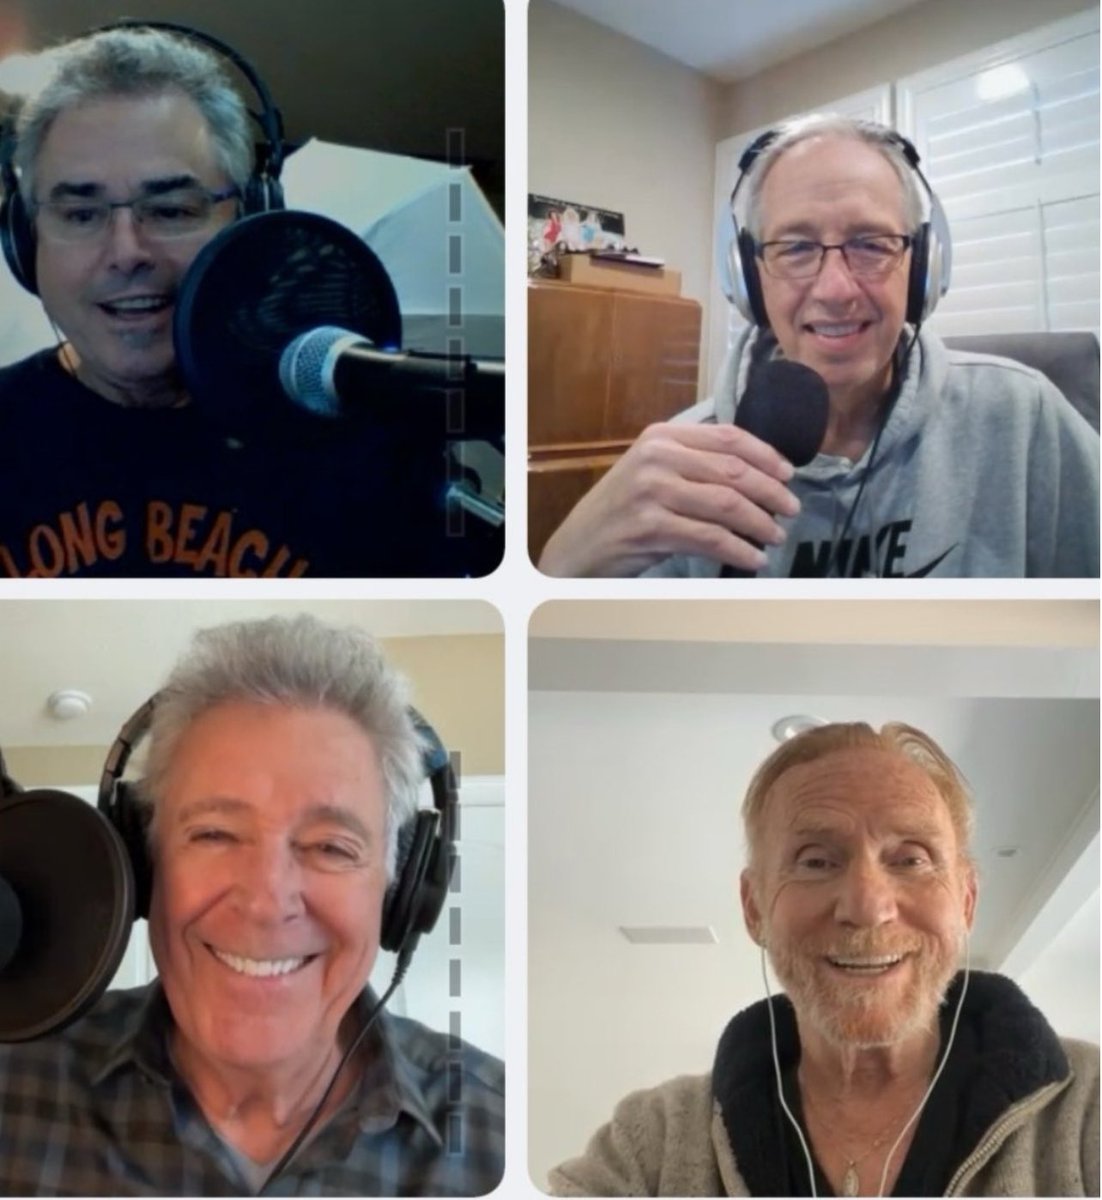 Had a great time talking with old friends @MrBarryWilliams and @CKnightBrands on the Real Brady Bros podcast. Have a listen here: podcasts.apple.com/us/podcast/dan…